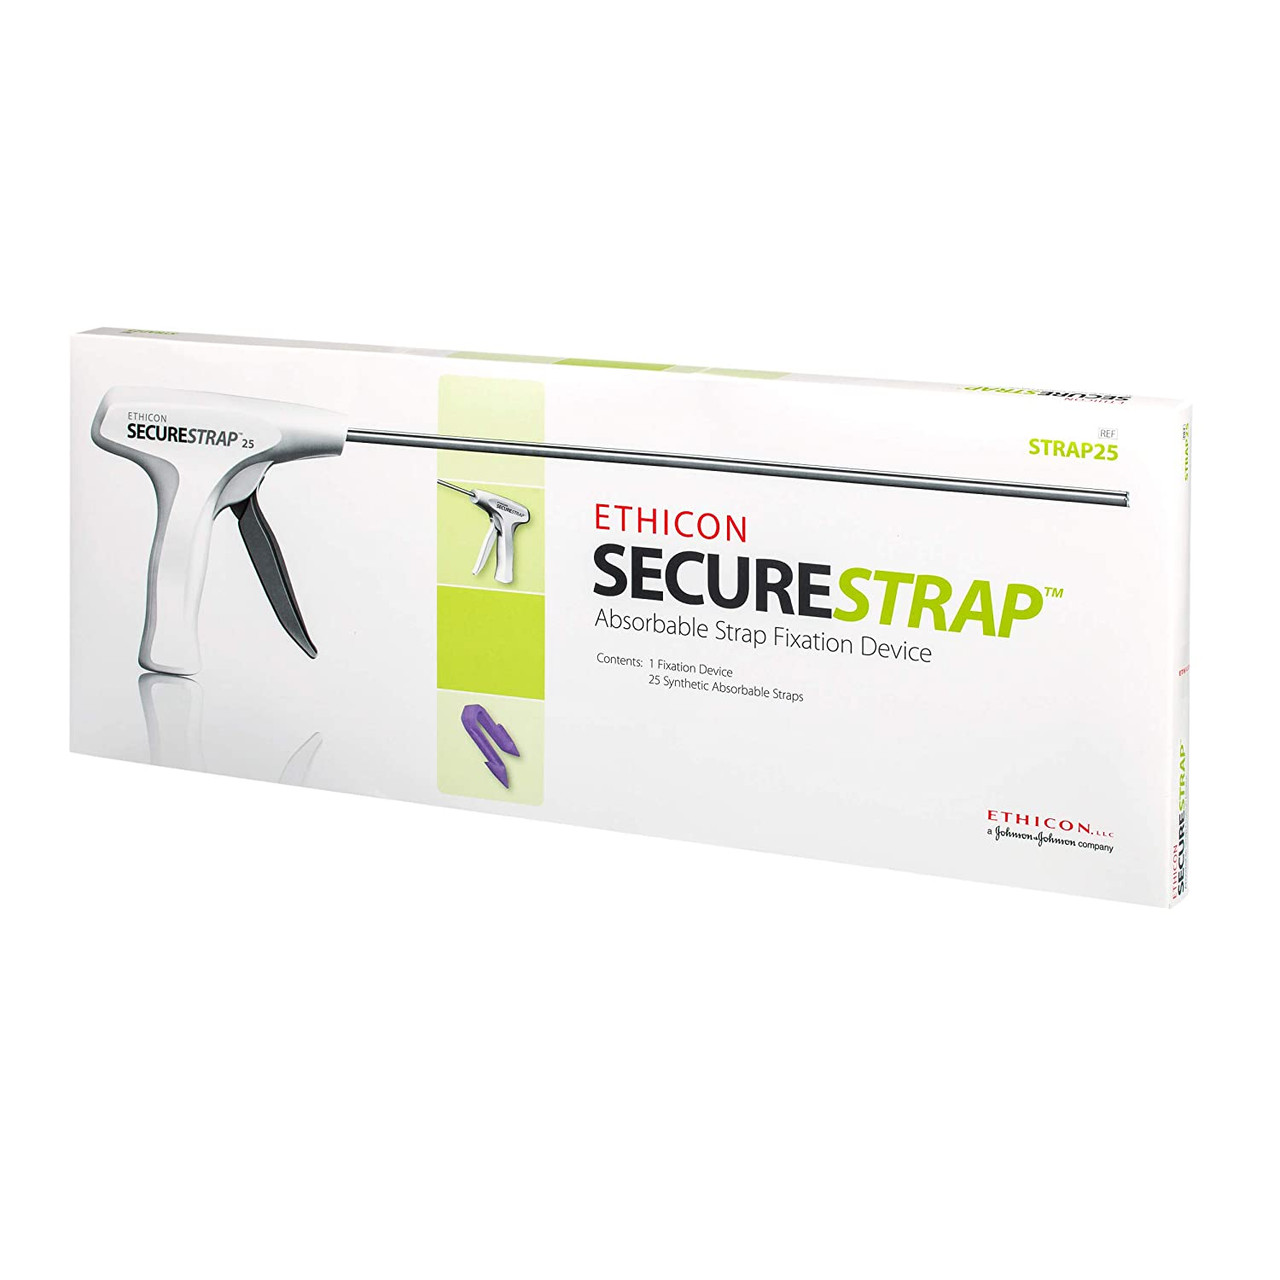 Ethicon STRAP25 - Securestrap 5mm Absorbable Strap Fixation Device